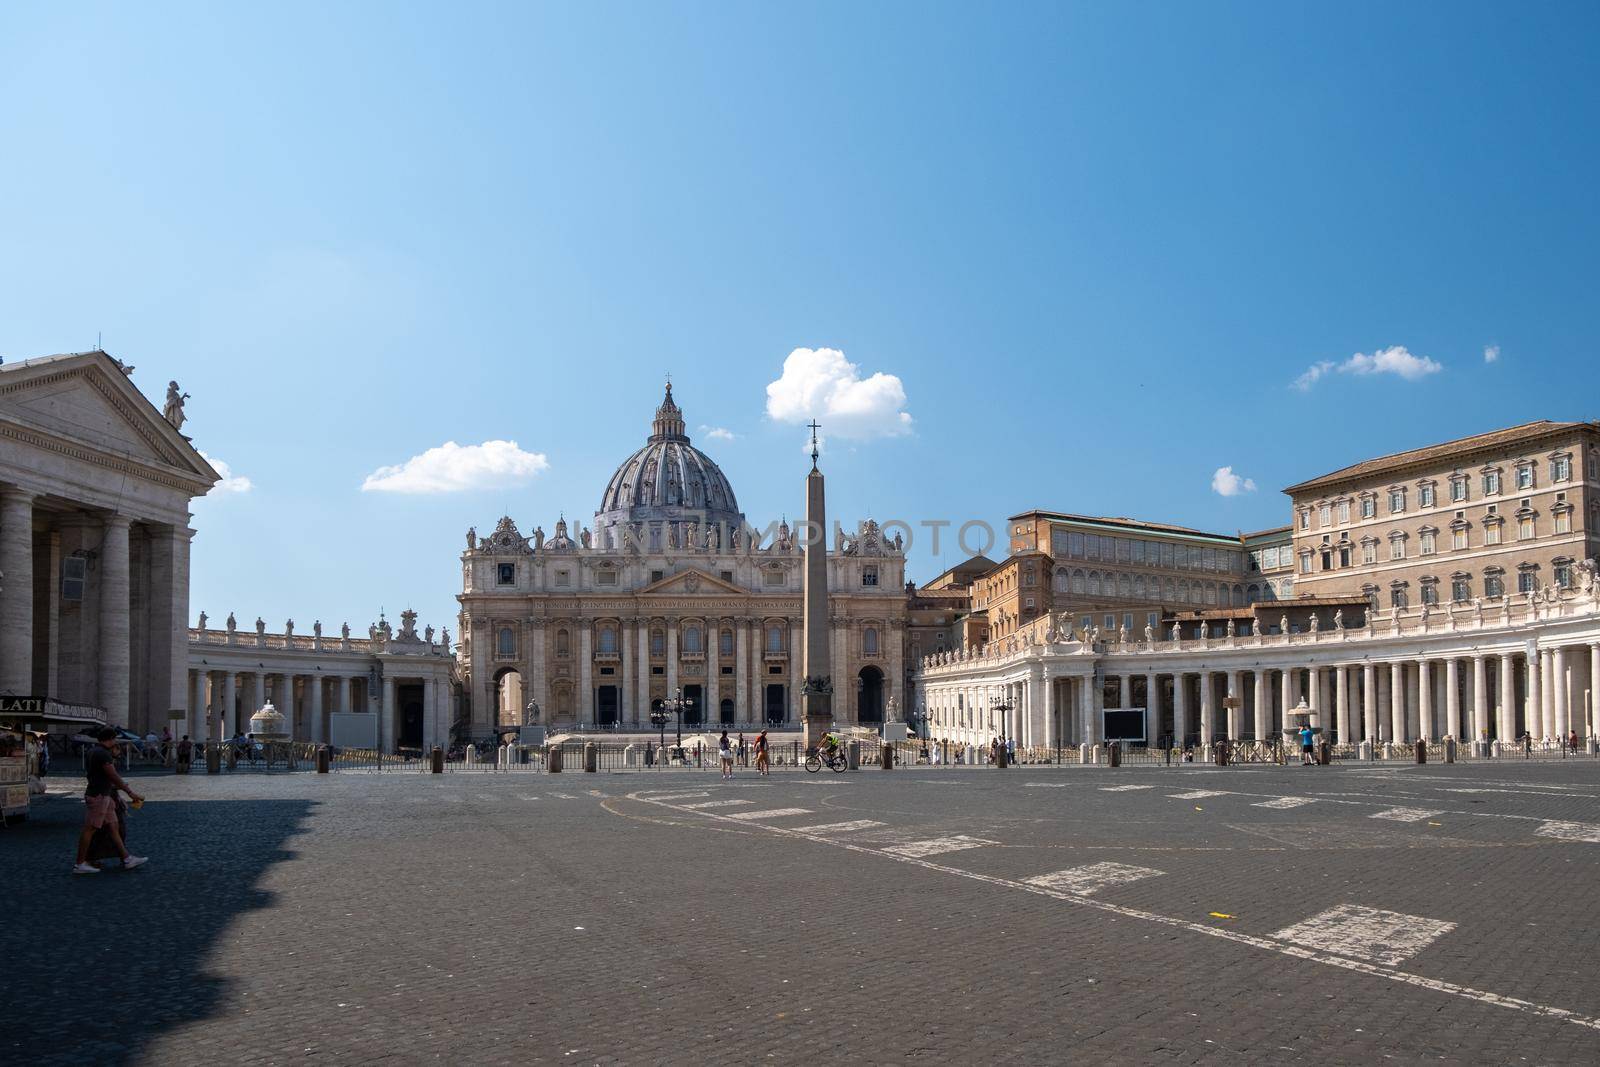 St. Peter's Basilica in the morning from Via della Conciliazione in Rome. Vatican City Rome Italy. Rome architecture and landmark. St. Peter's cathedral in Rome September 2020